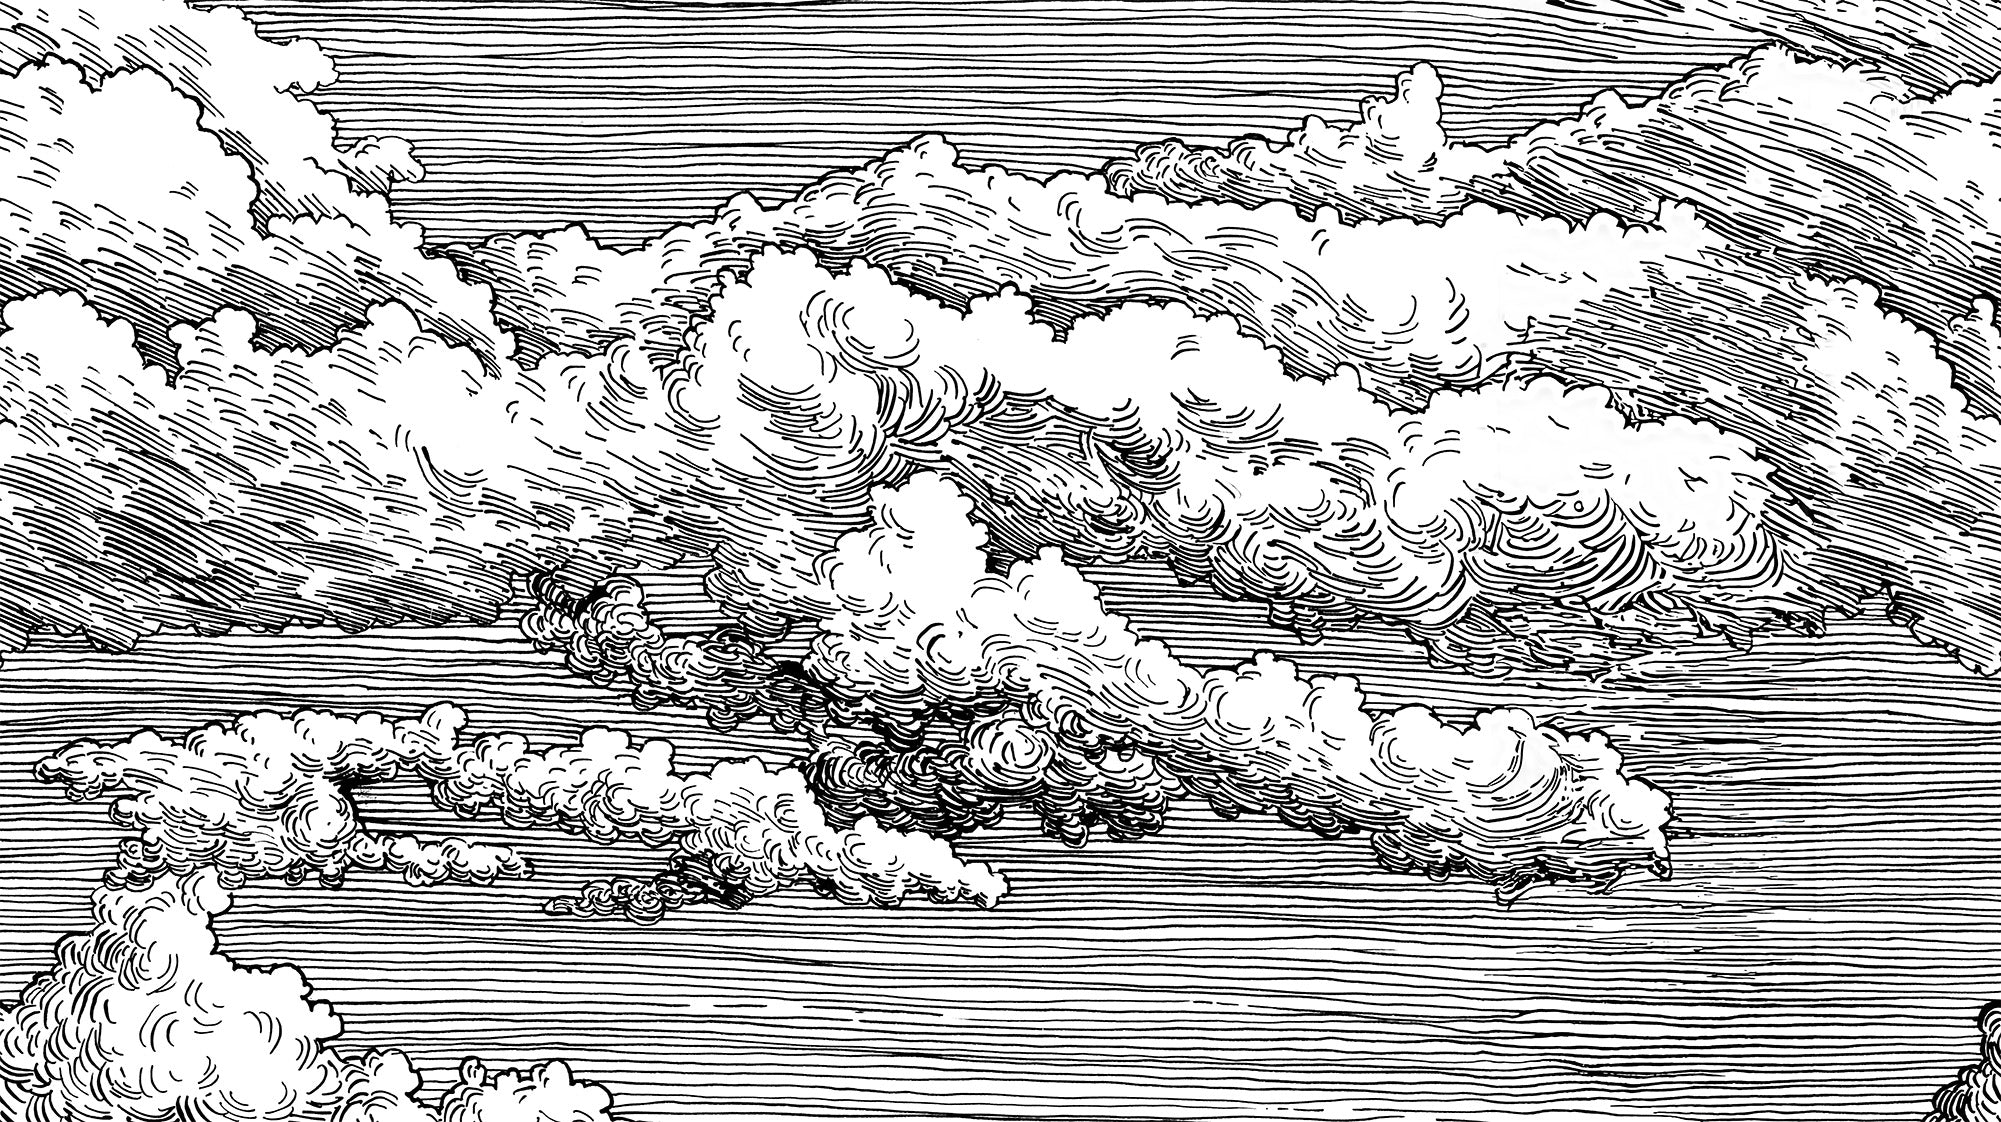 Abut - Black & White Monochrome Clouds Etched Wallpaper Mural